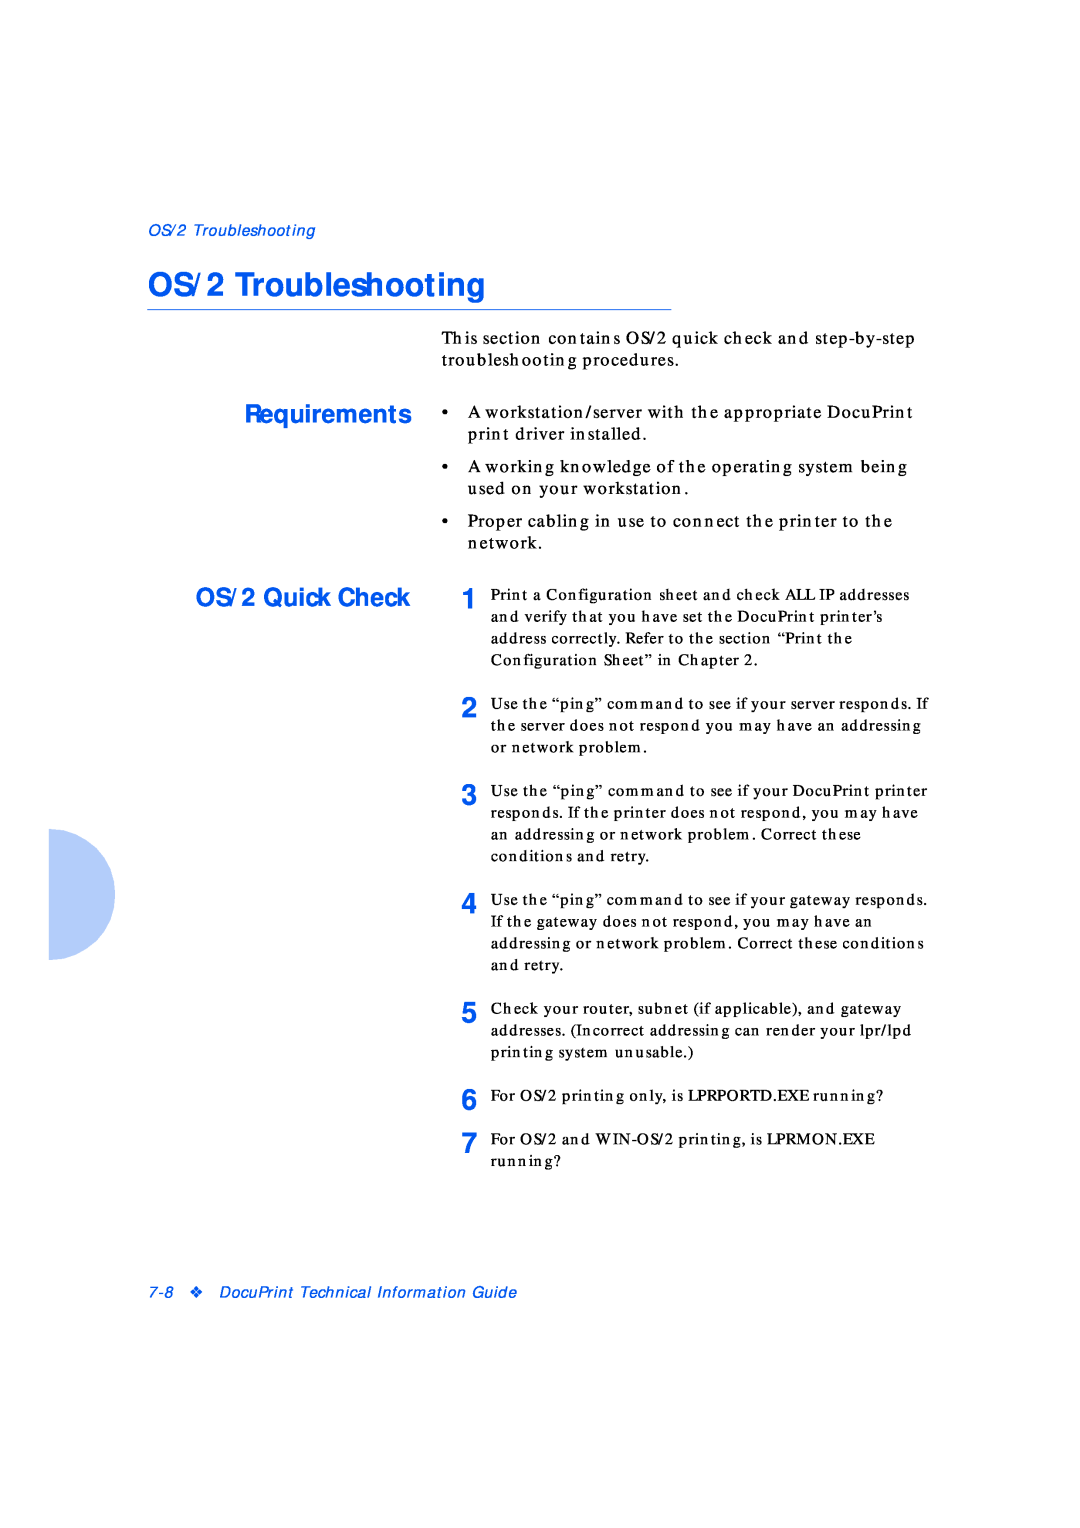 Xerox Network Laser Printers manual OS/2 Troubleshooting, Requirements OS/2 Quick Check 